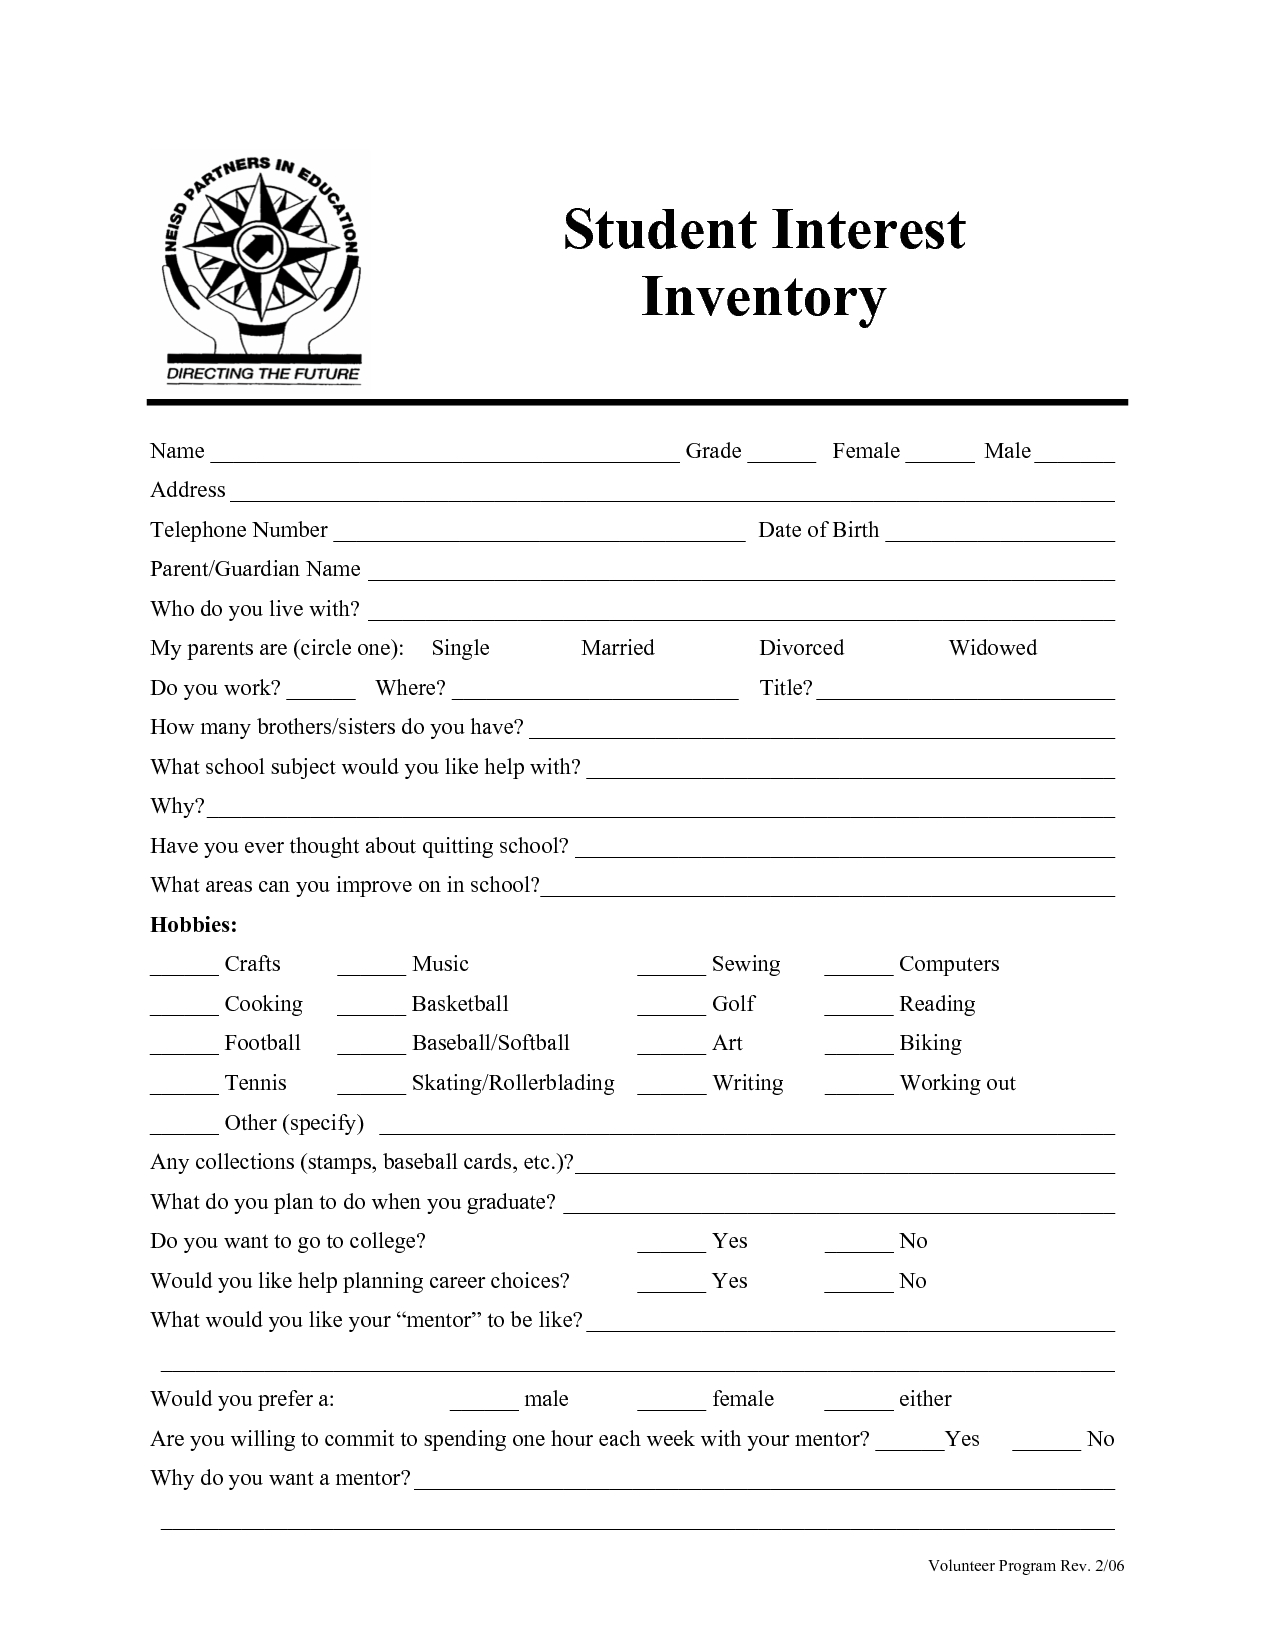 printable-career-interest-survey-for-high-school-students-free